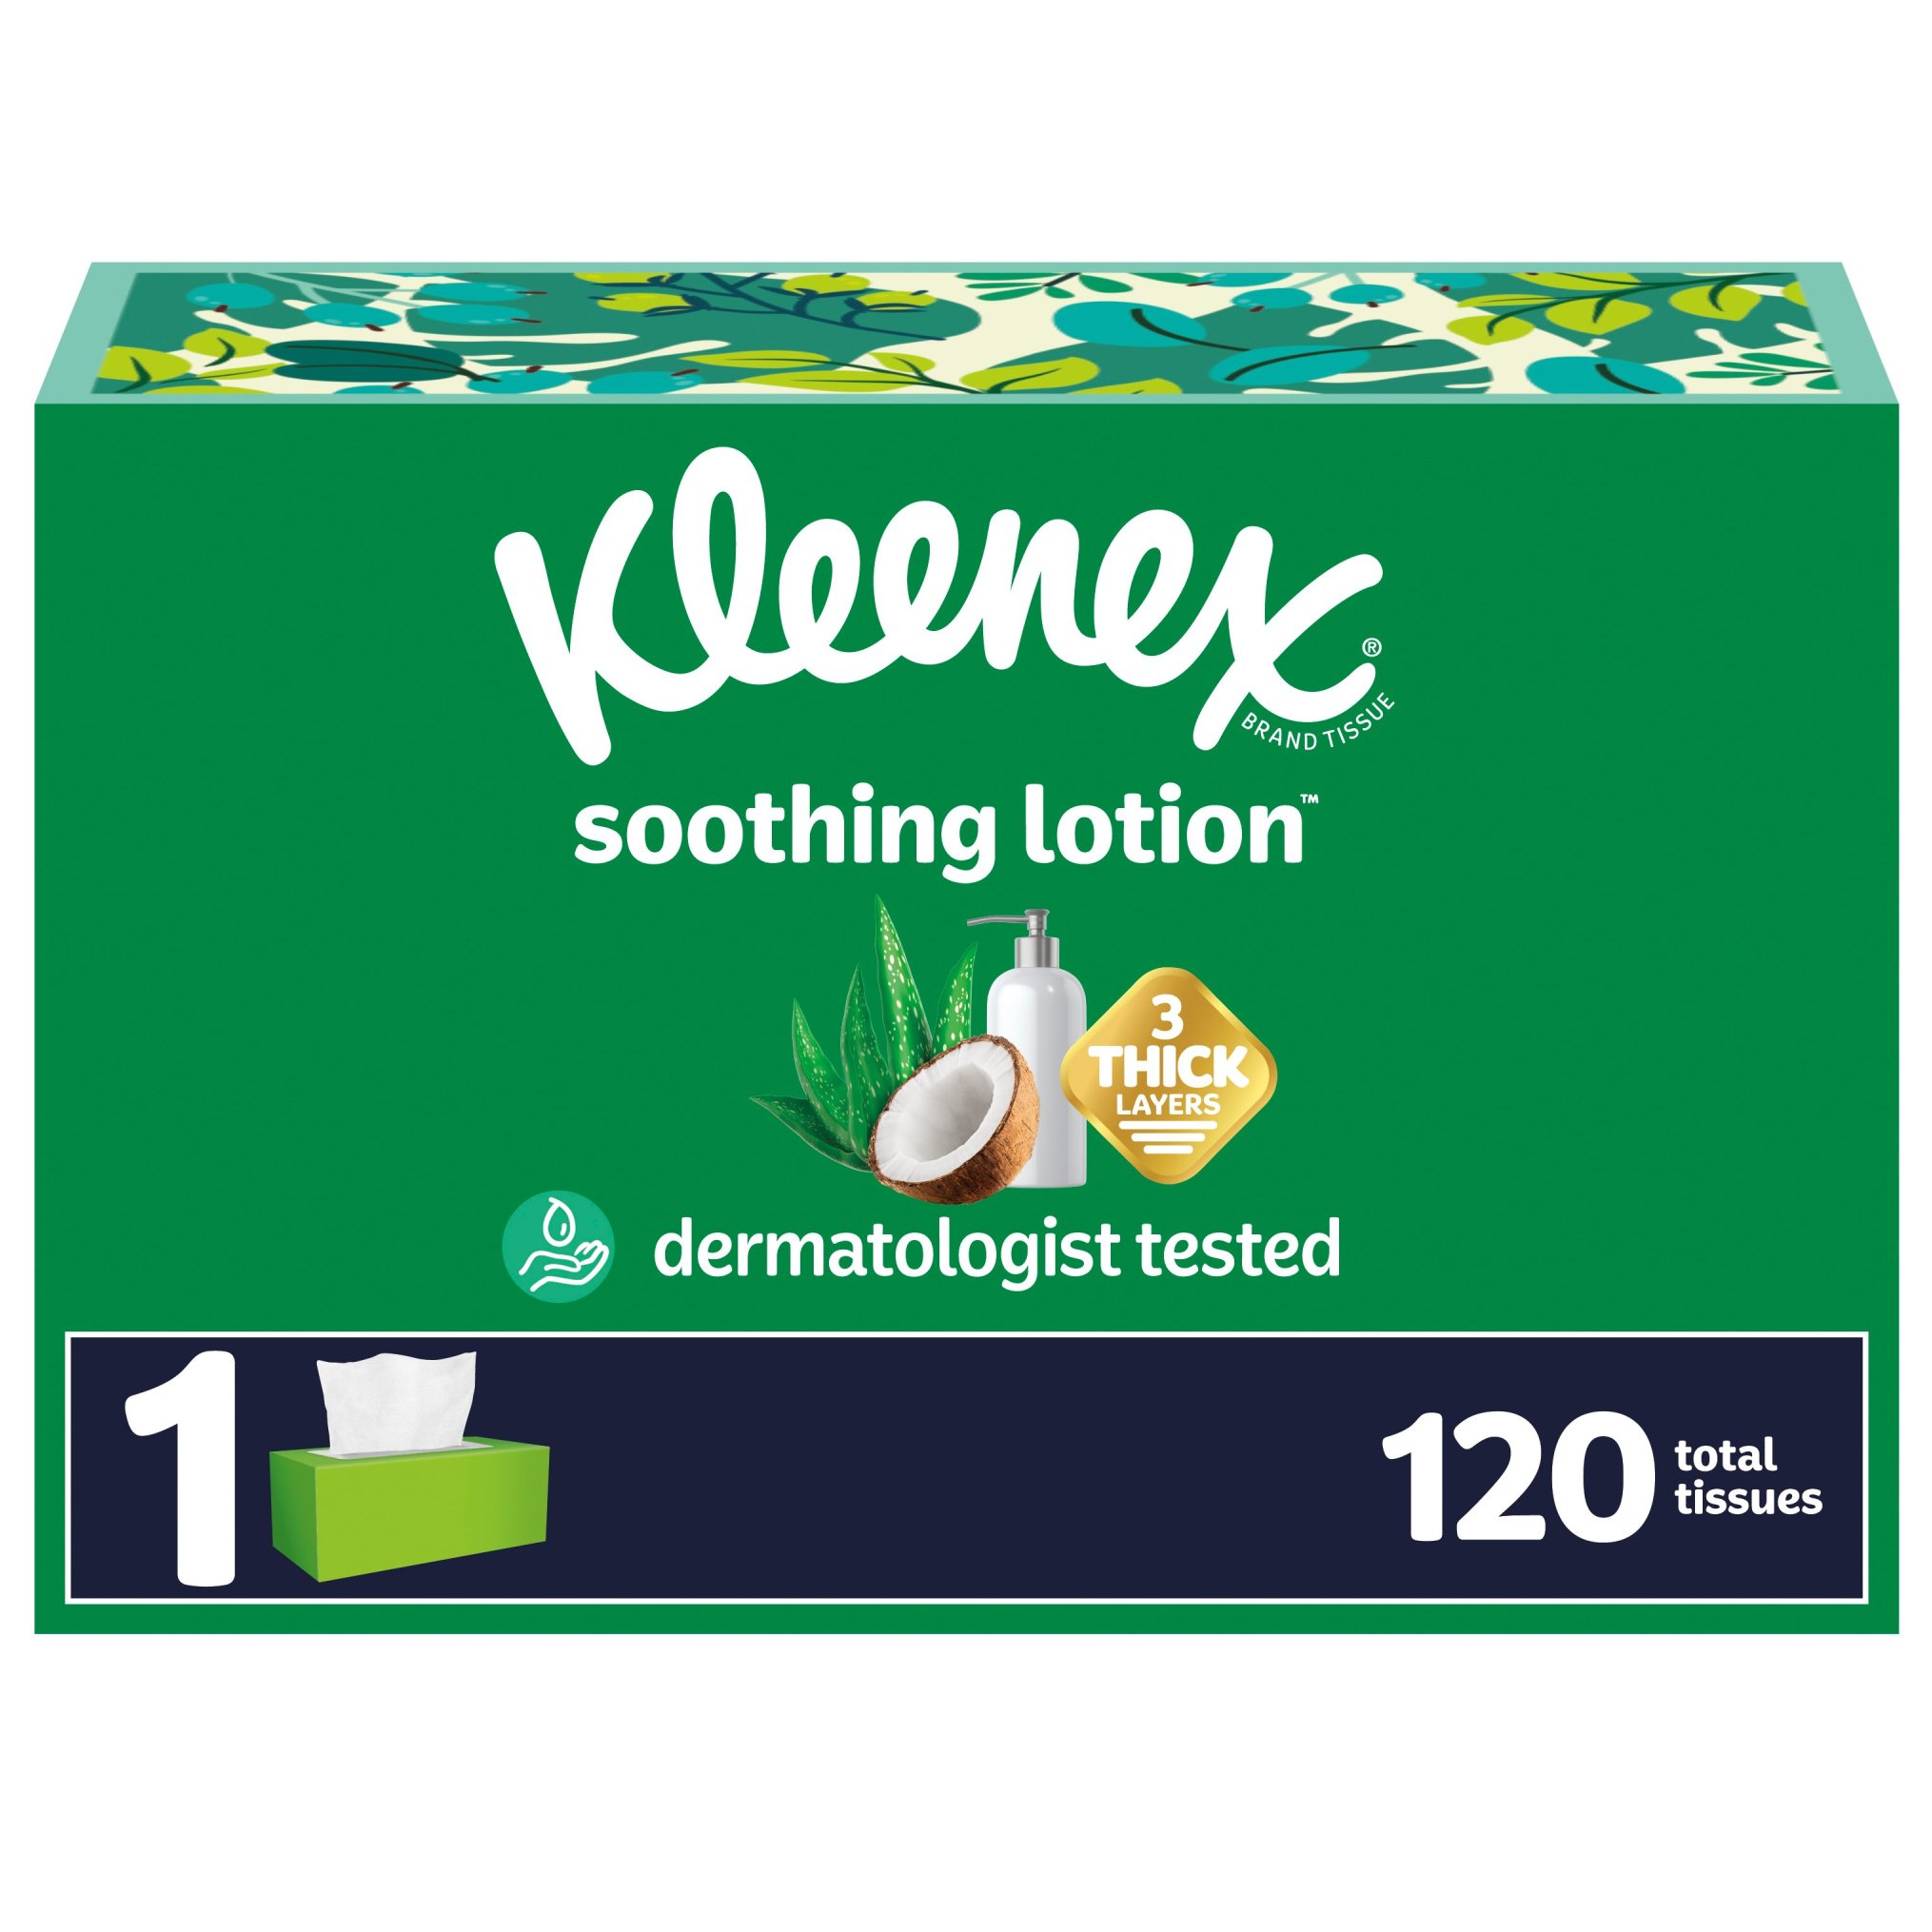 Kleenex Soothing Lotion Facial Tissues with Coconut Oil, 1 Flat Box, 120 Tissues per Box, 3-Ply